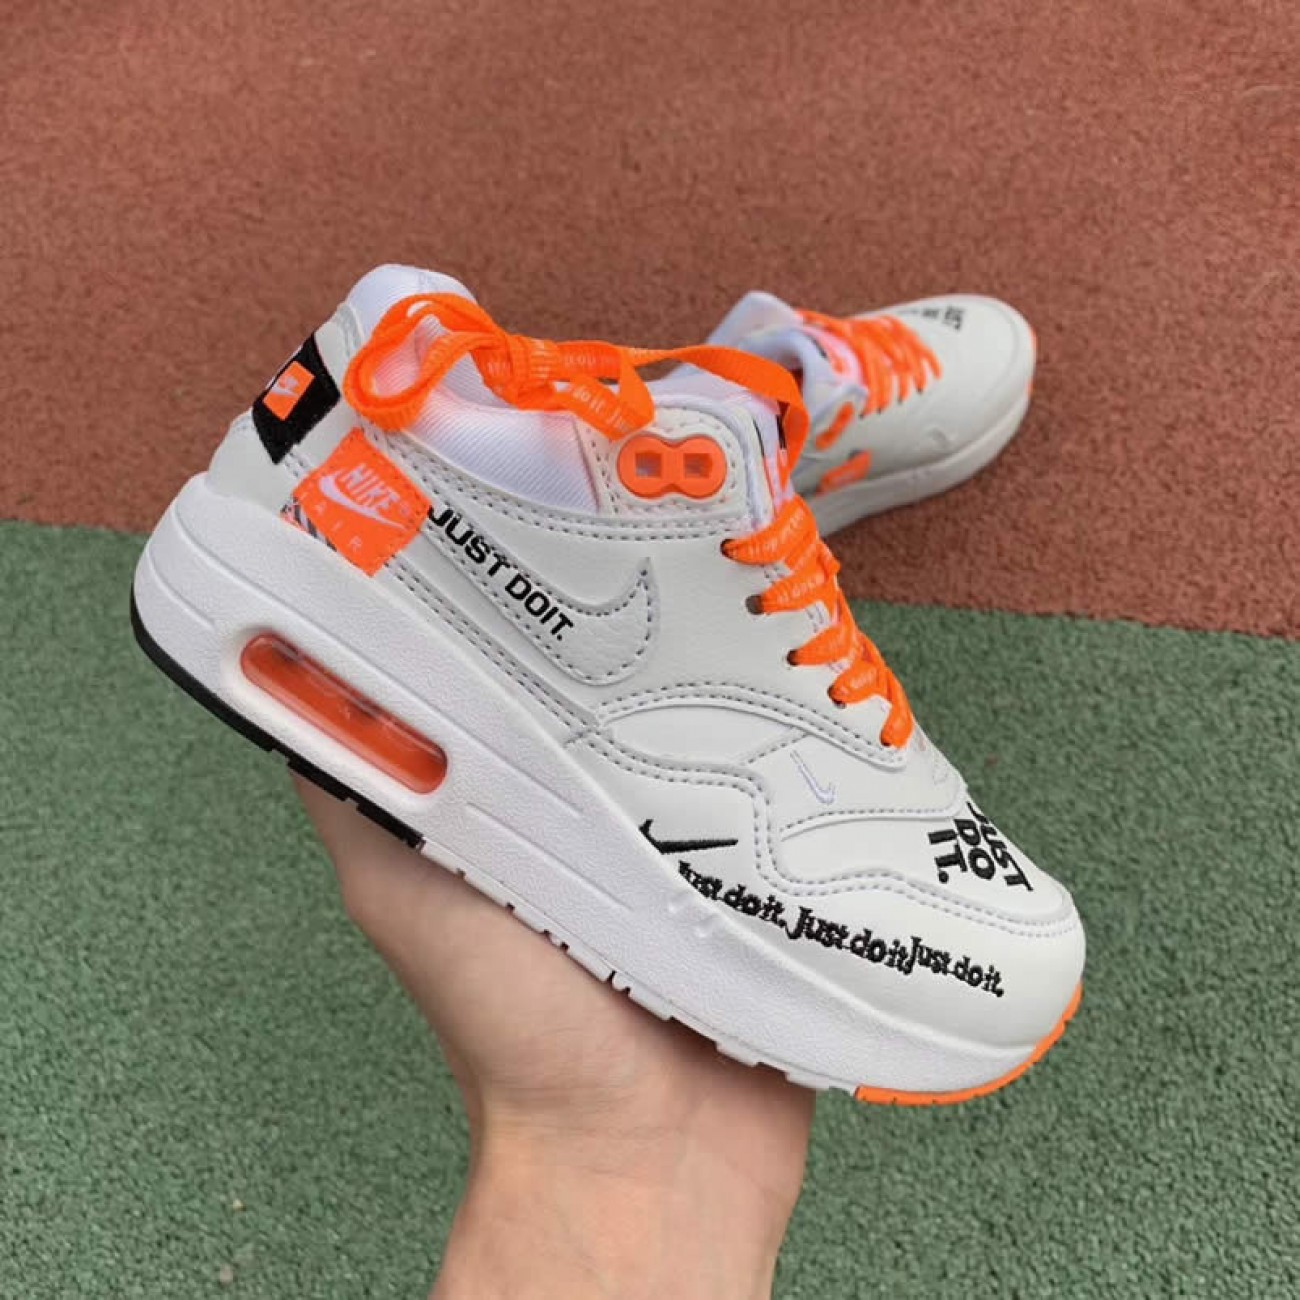 Kids Nike Air Max 1 Lux "Just Do It" White Orange Shoes 917691-100